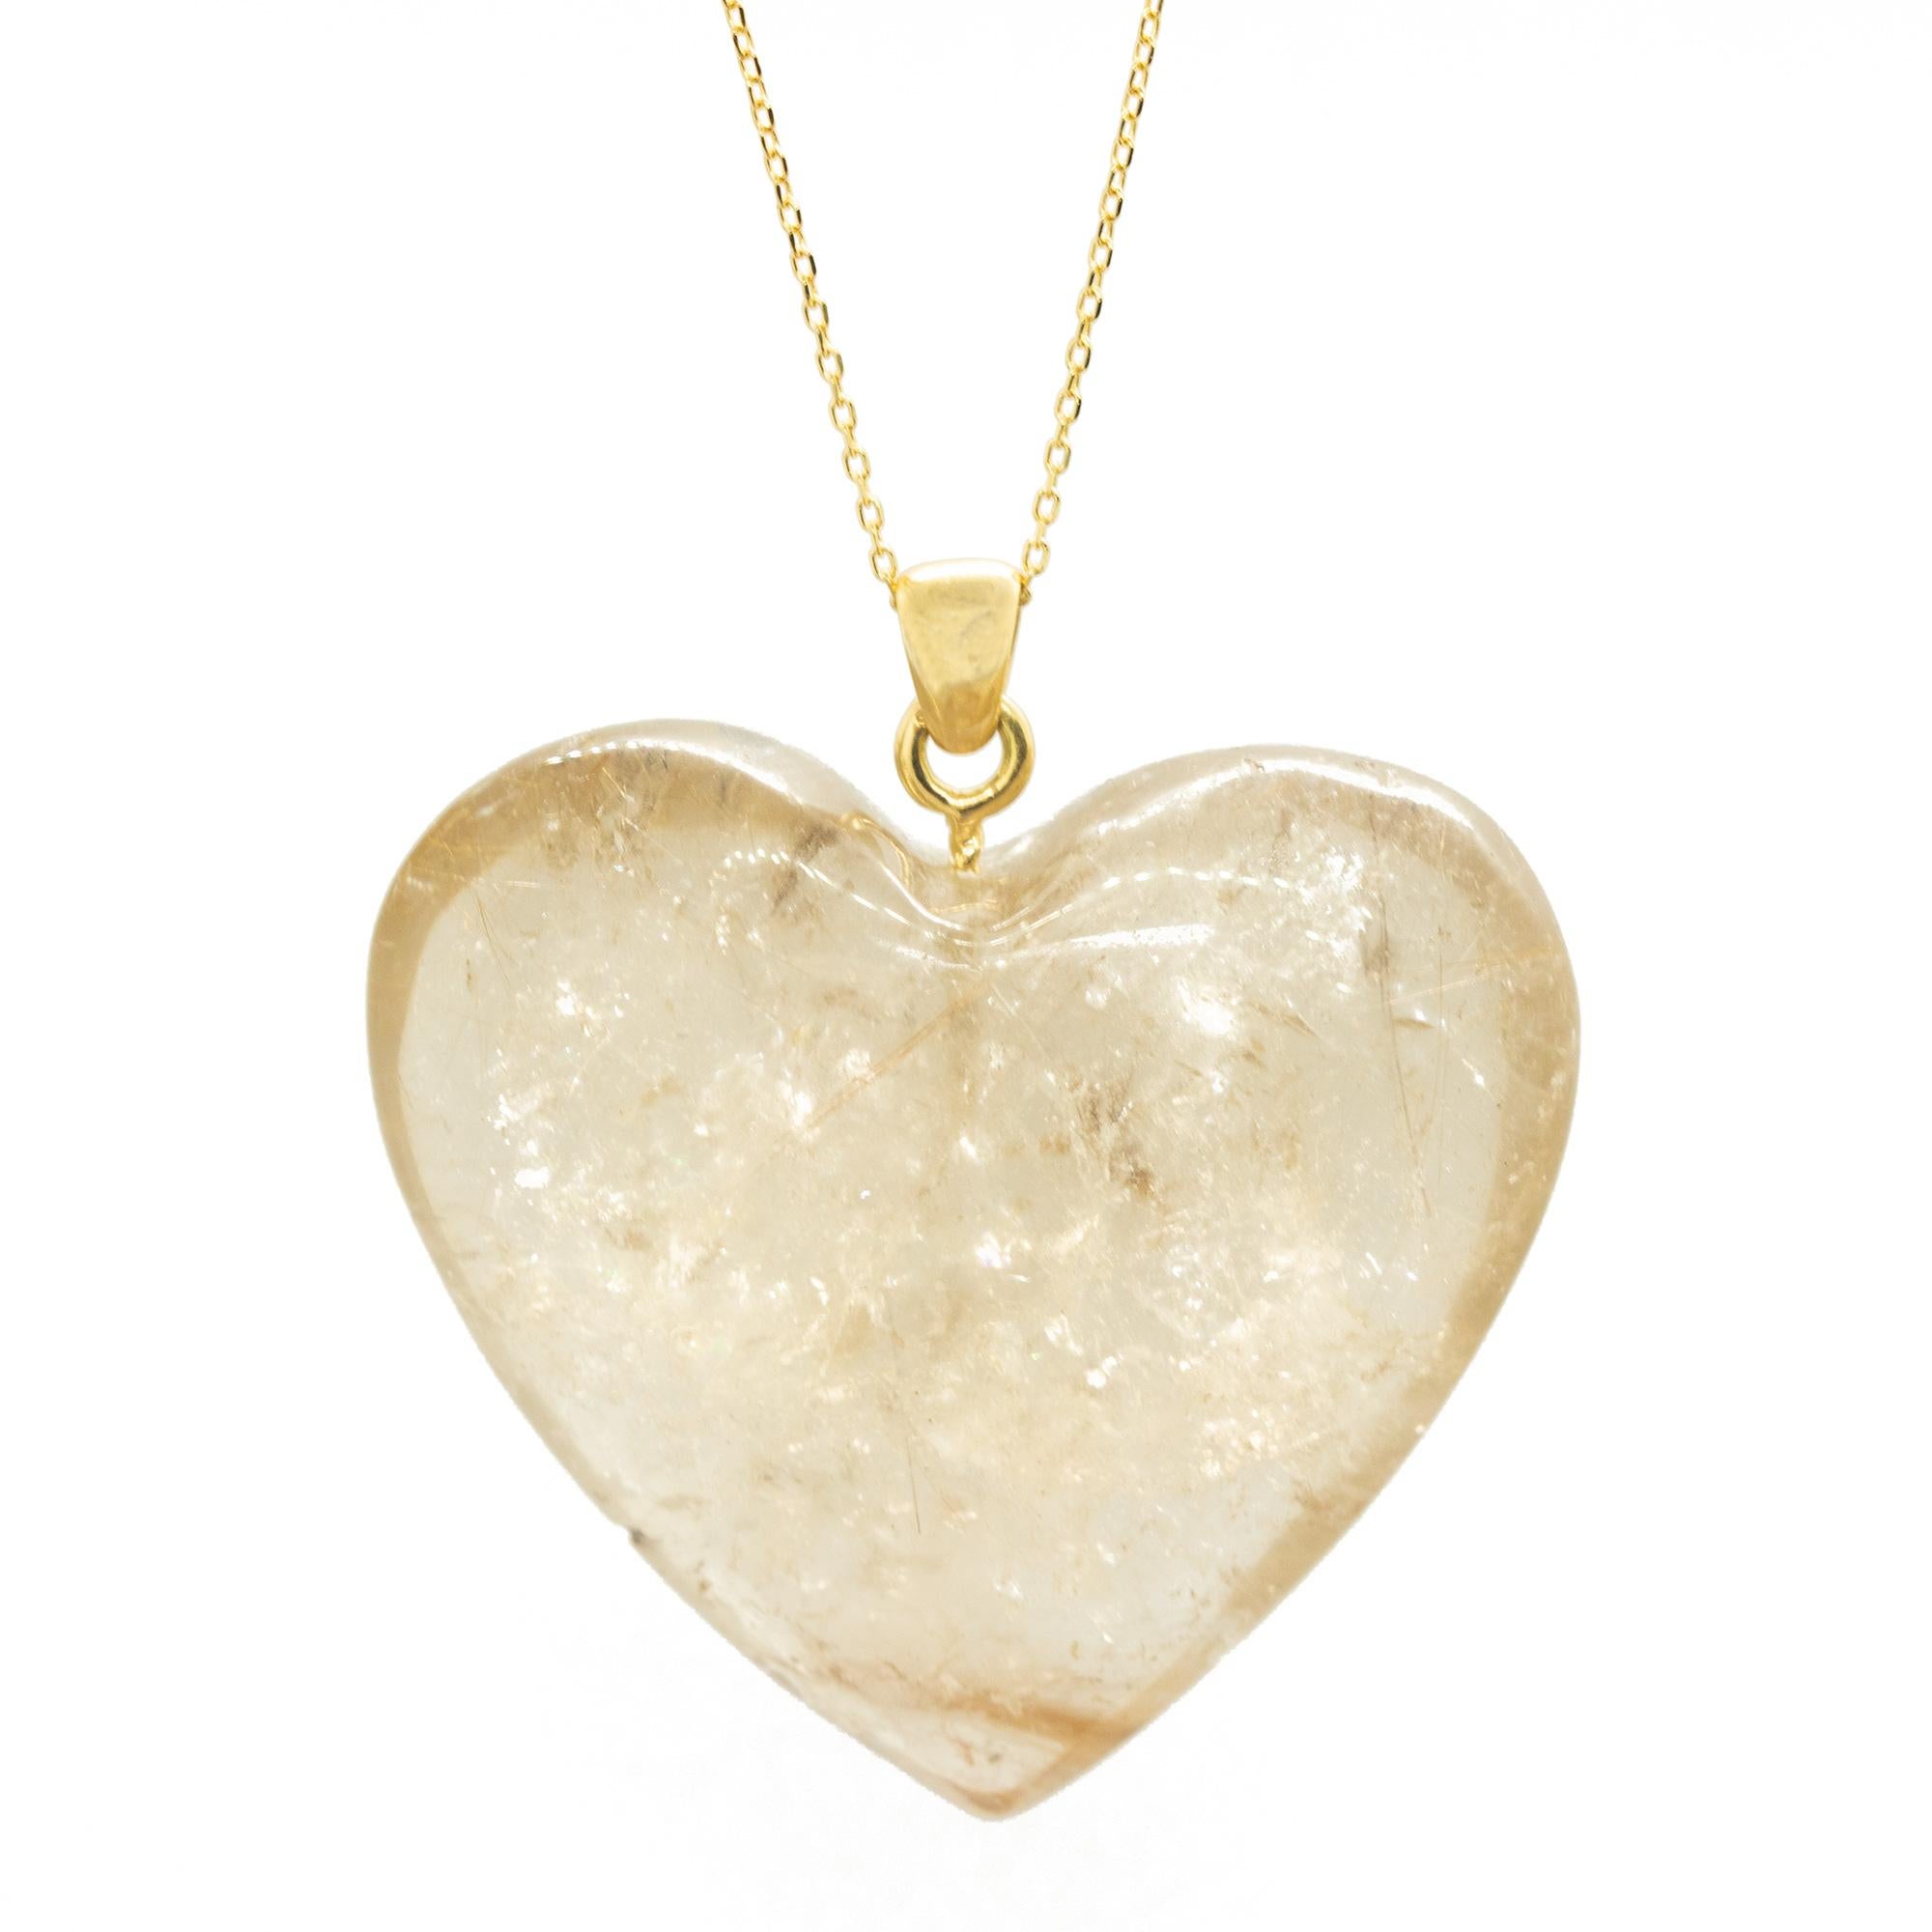 Take love with you everywhere! This breathtaking necklace has a sweet design with the most precious gemstone hanging from a delicate 18 karat yellow gold chain. Join our Italian designers through a magical trip around the hues of love.

This